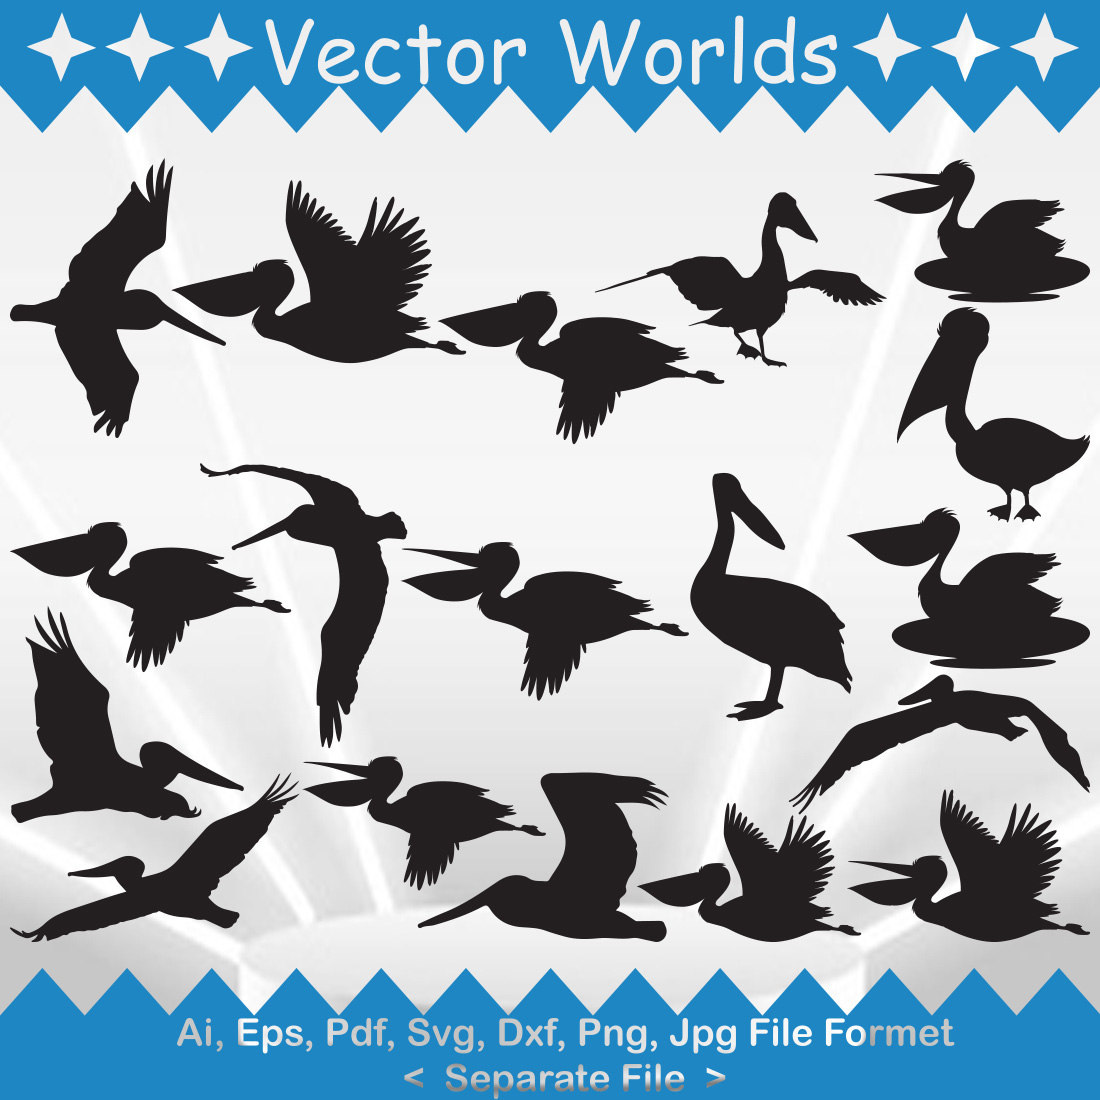 Large set of silhouettes of birds flying.